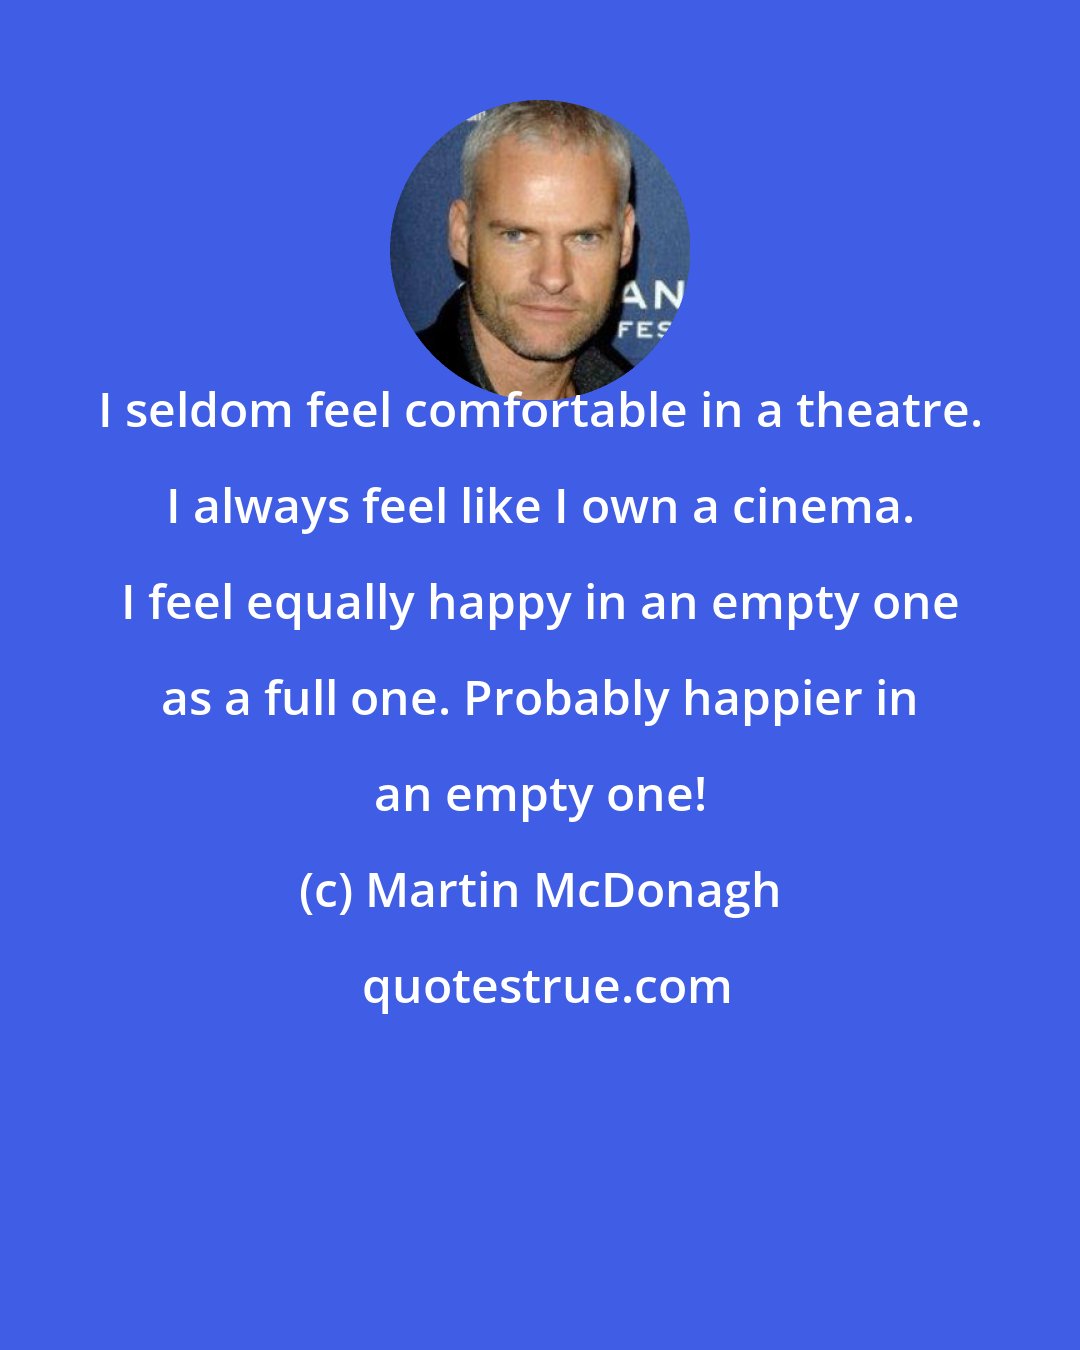 Martin McDonagh: I seldom feel comfortable in a theatre. I always feel like I own a cinema. I feel equally happy in an empty one as a full one. Probably happier in an empty one!